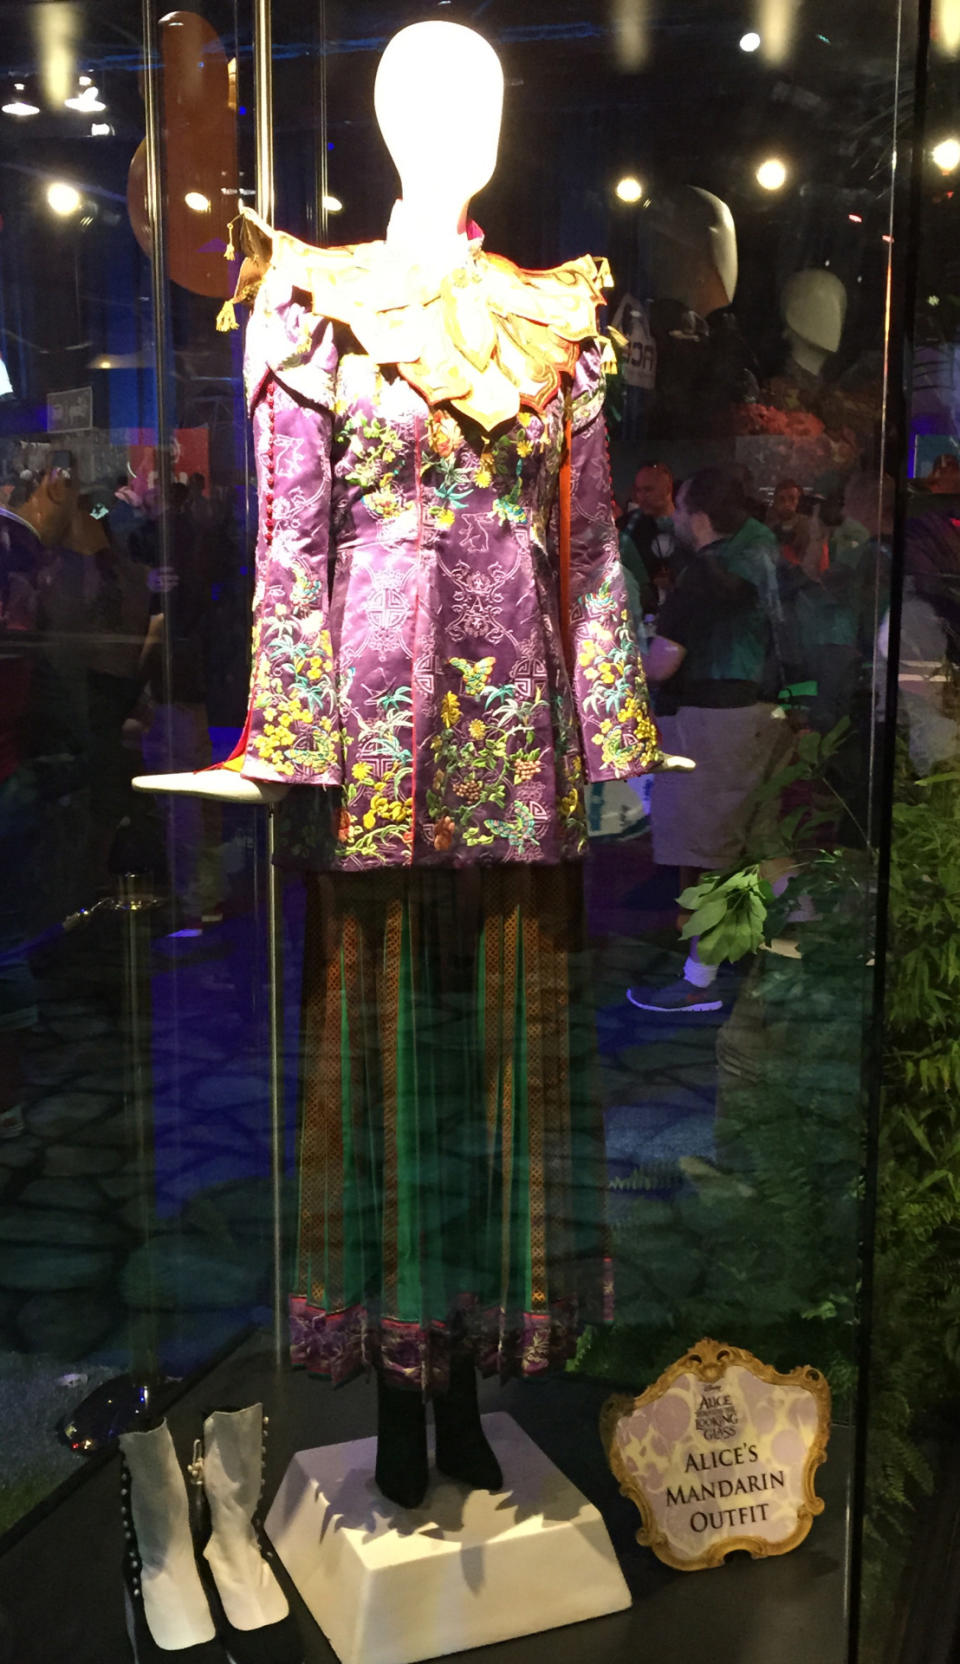 The 2016 'Alice in Wonderland’ sequel, 'Alice Through the Looking Glass,’ is getting lots of play at D23. Star Mia Wasikowska will sport this colorful 'Mandarin outfit.’